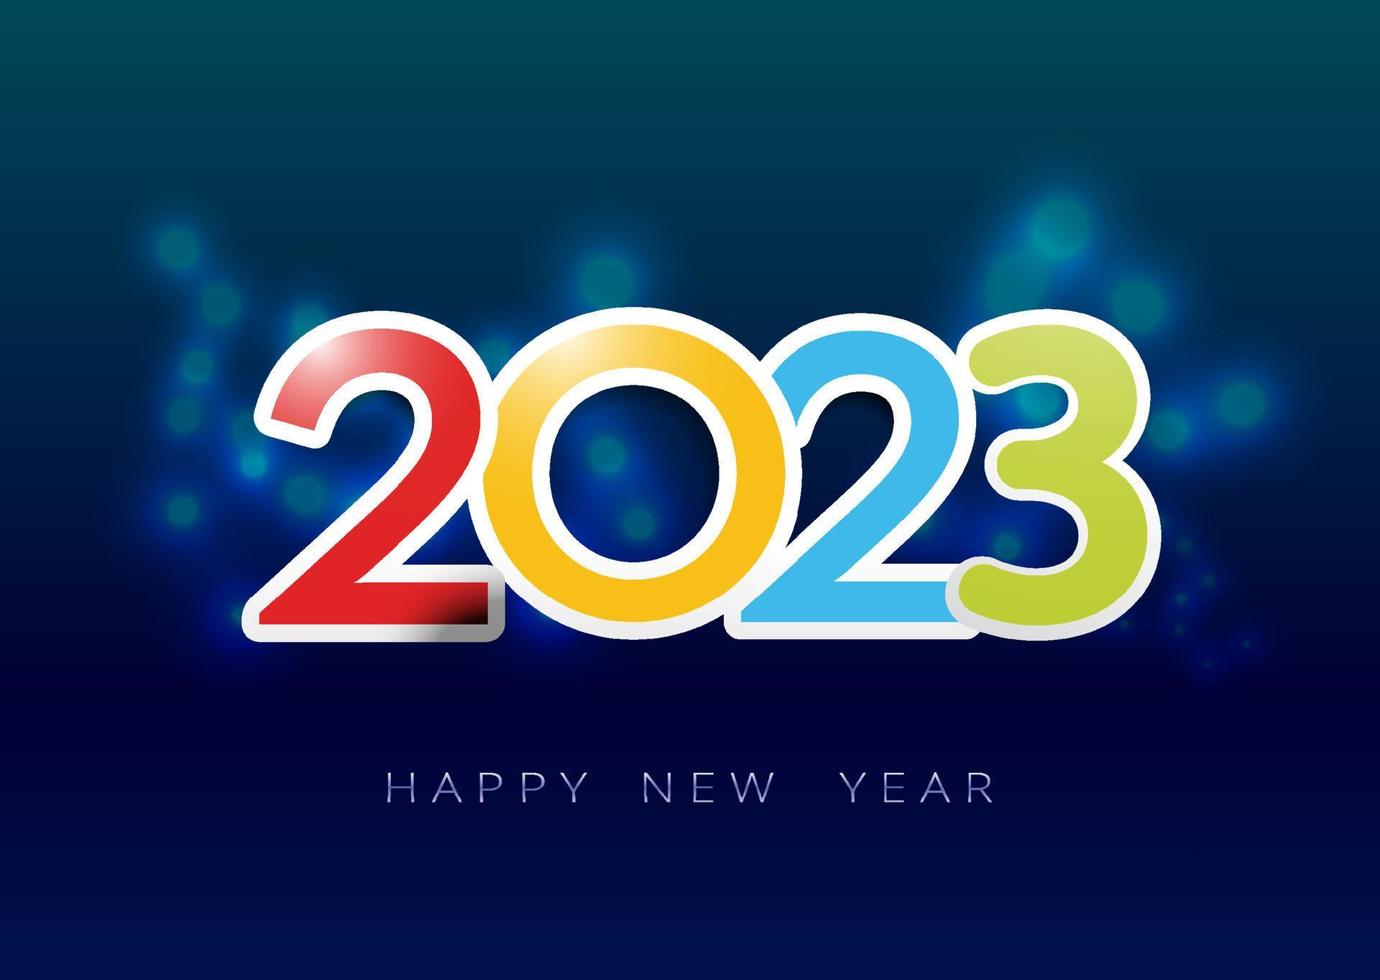 Merry Christmas and Happy New Year 2023 greeting card. Modern futuristic for 2023